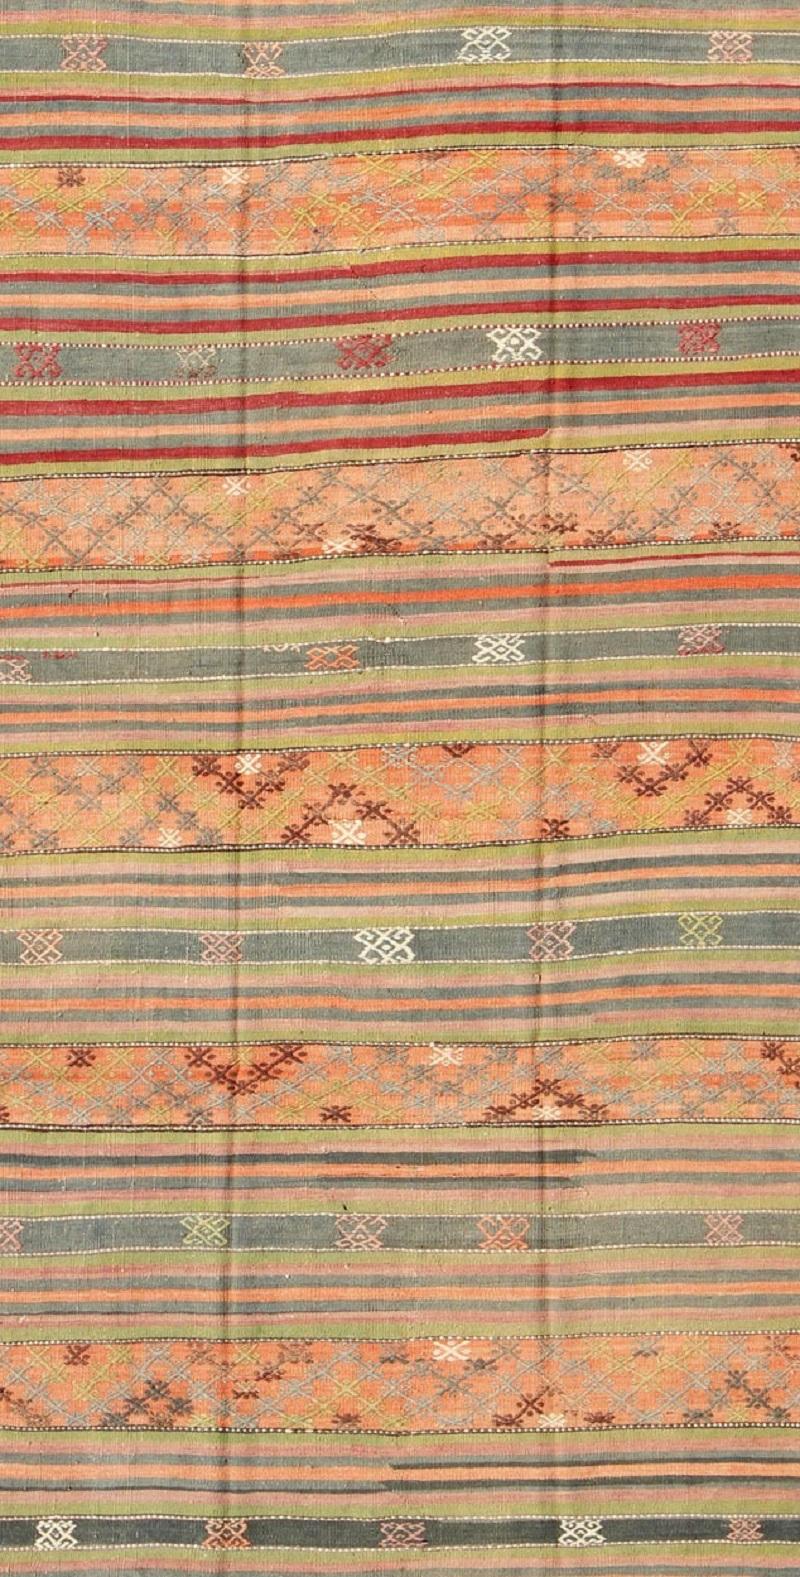 Hand-Woven Vintage Turkish Kilim Rug with Geometric Shapes and Colorful Stripes For Sale